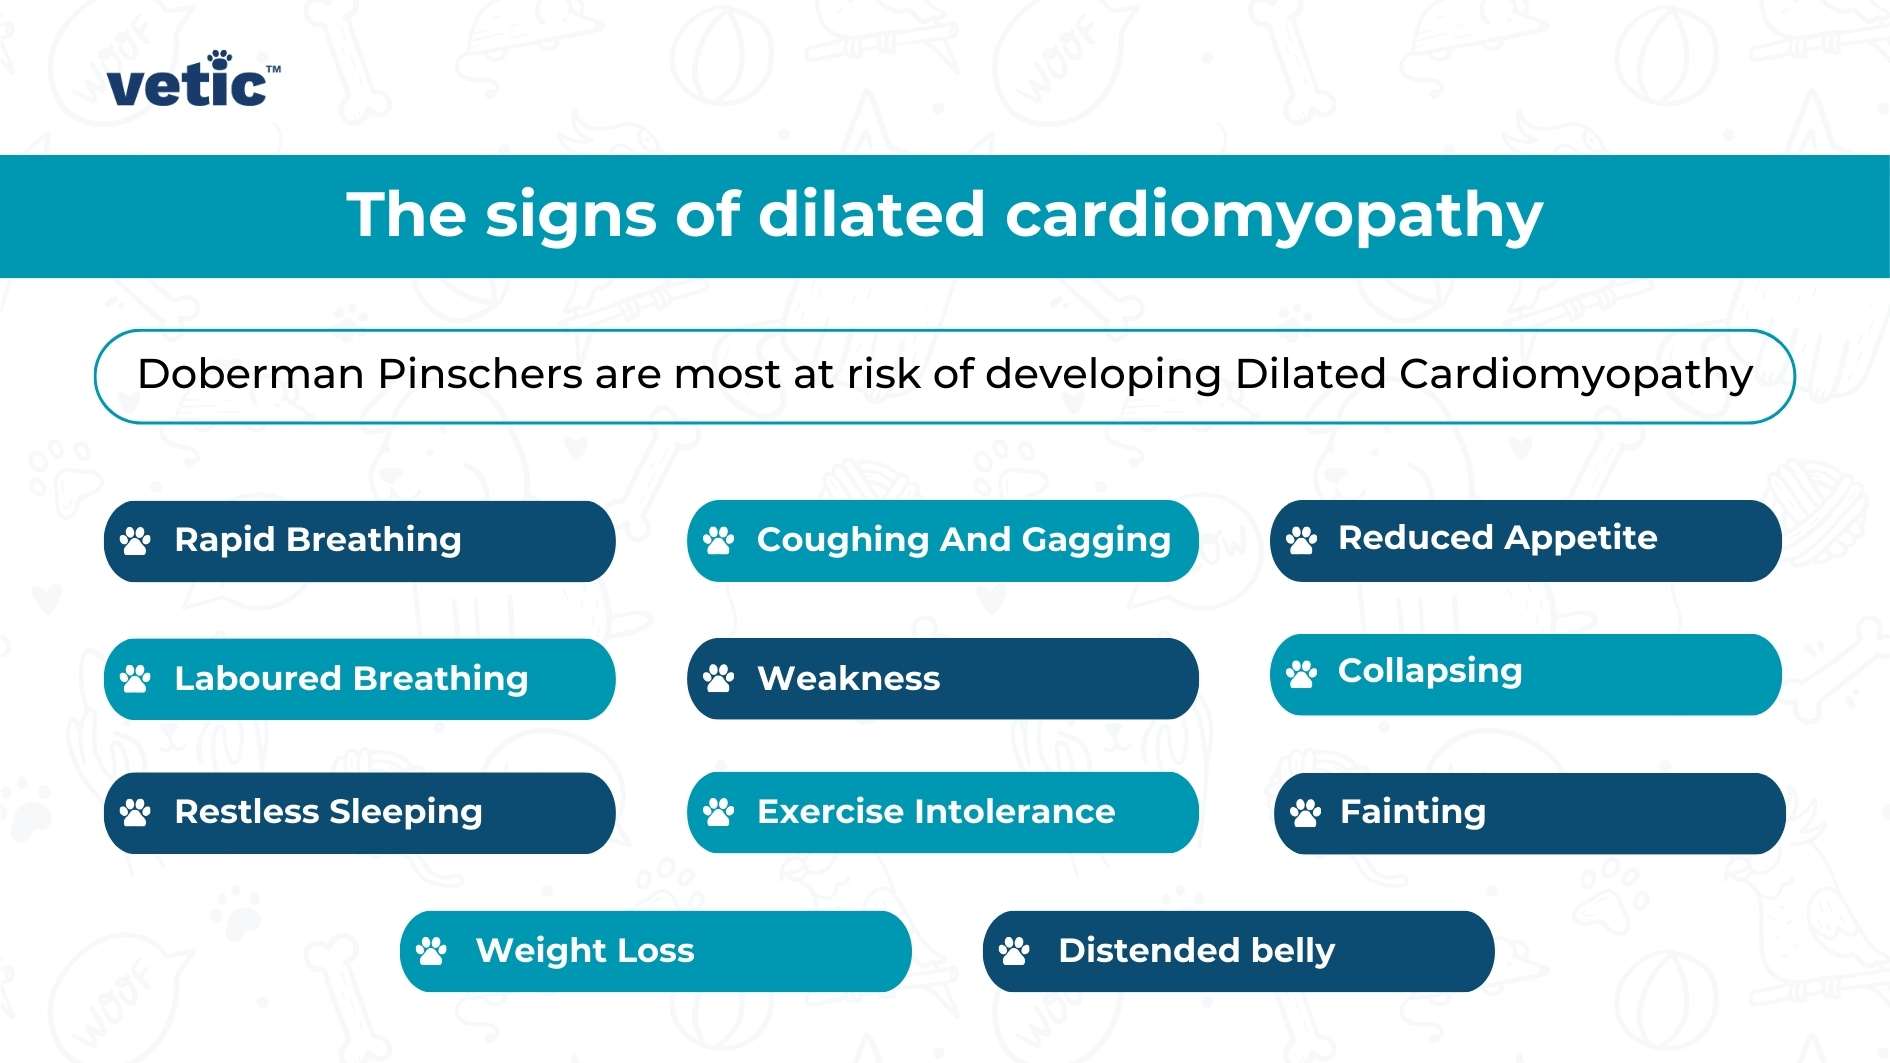 The title “The signs of dilated cardiomyopathy” is prominent at the top, followed by a statement that Doberman Pinschers are most at risk of developing this condition. Below, there are twelve signs listed with corresponding icons: Rapid Breathing, Laboured Breathing, Restless Sleeping, Coughing And Gagging, Weakness, Exercise Intolerance, Weight Loss, Reduced Appetite, Collapsing, Fainting and Distended belly.